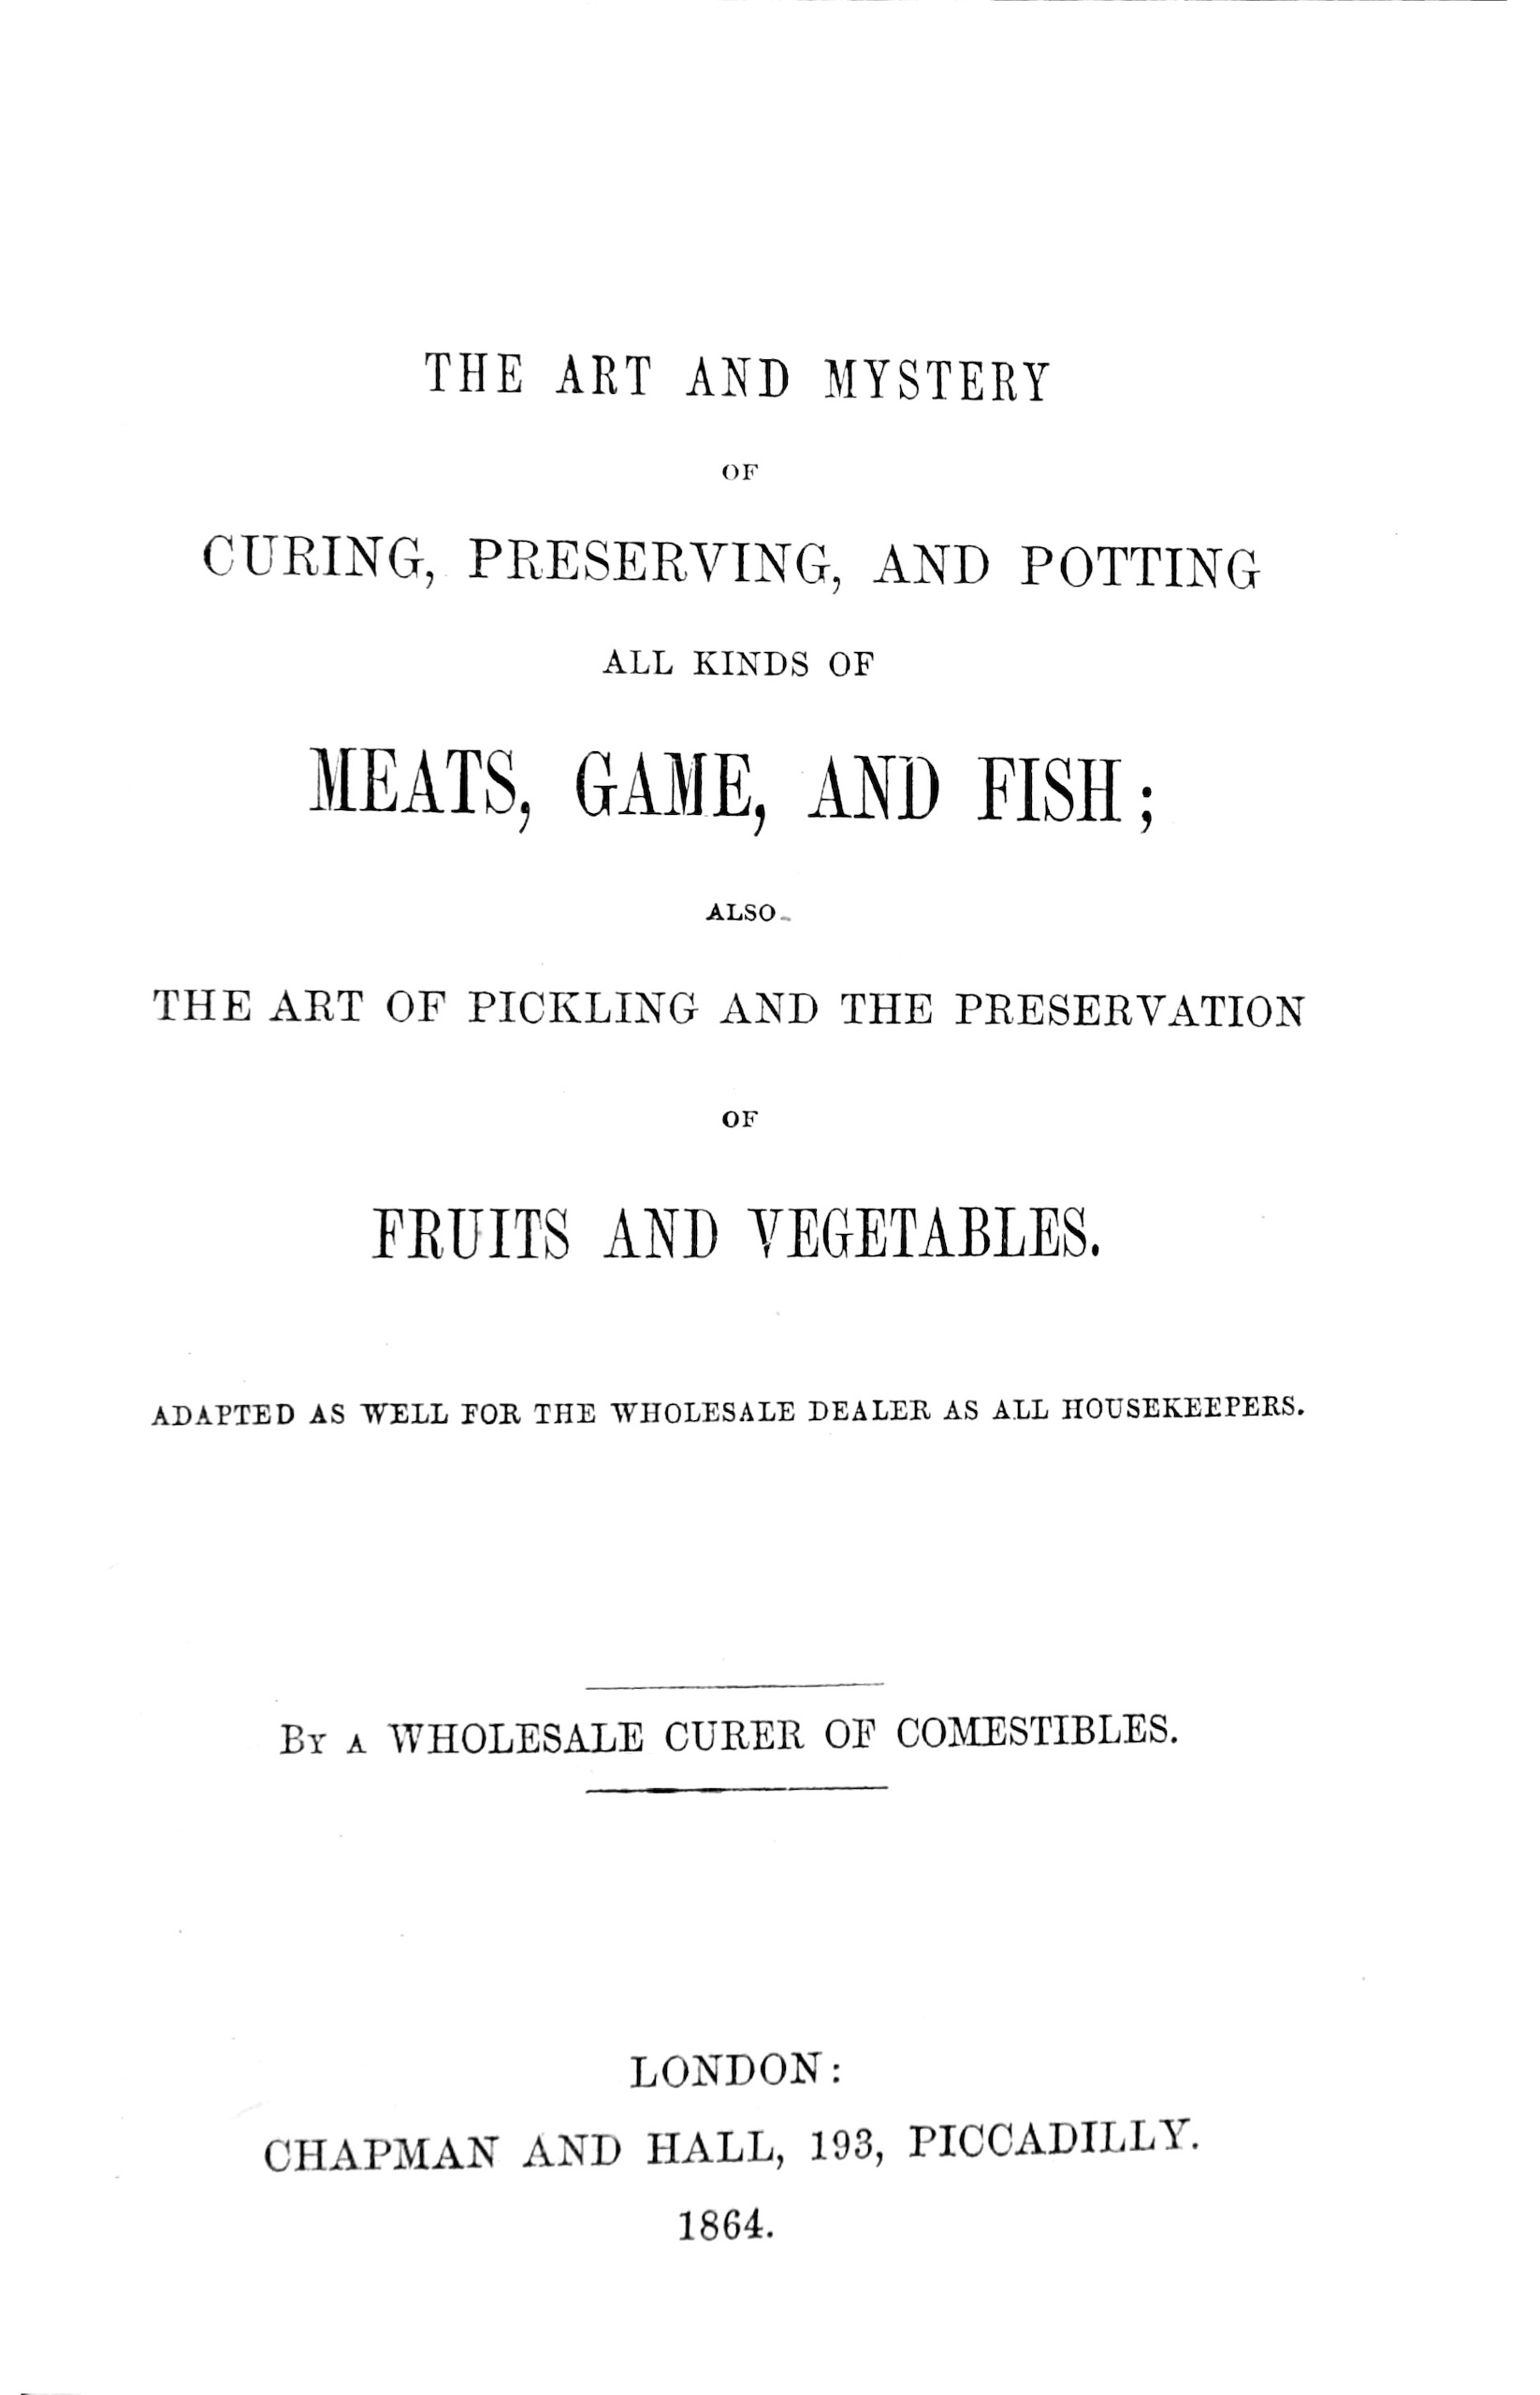 The art and mystery of curing, preserving, and potting all kinds of meats, game, and fish; also, the art of pickling and the preservation of fruits and vegetables